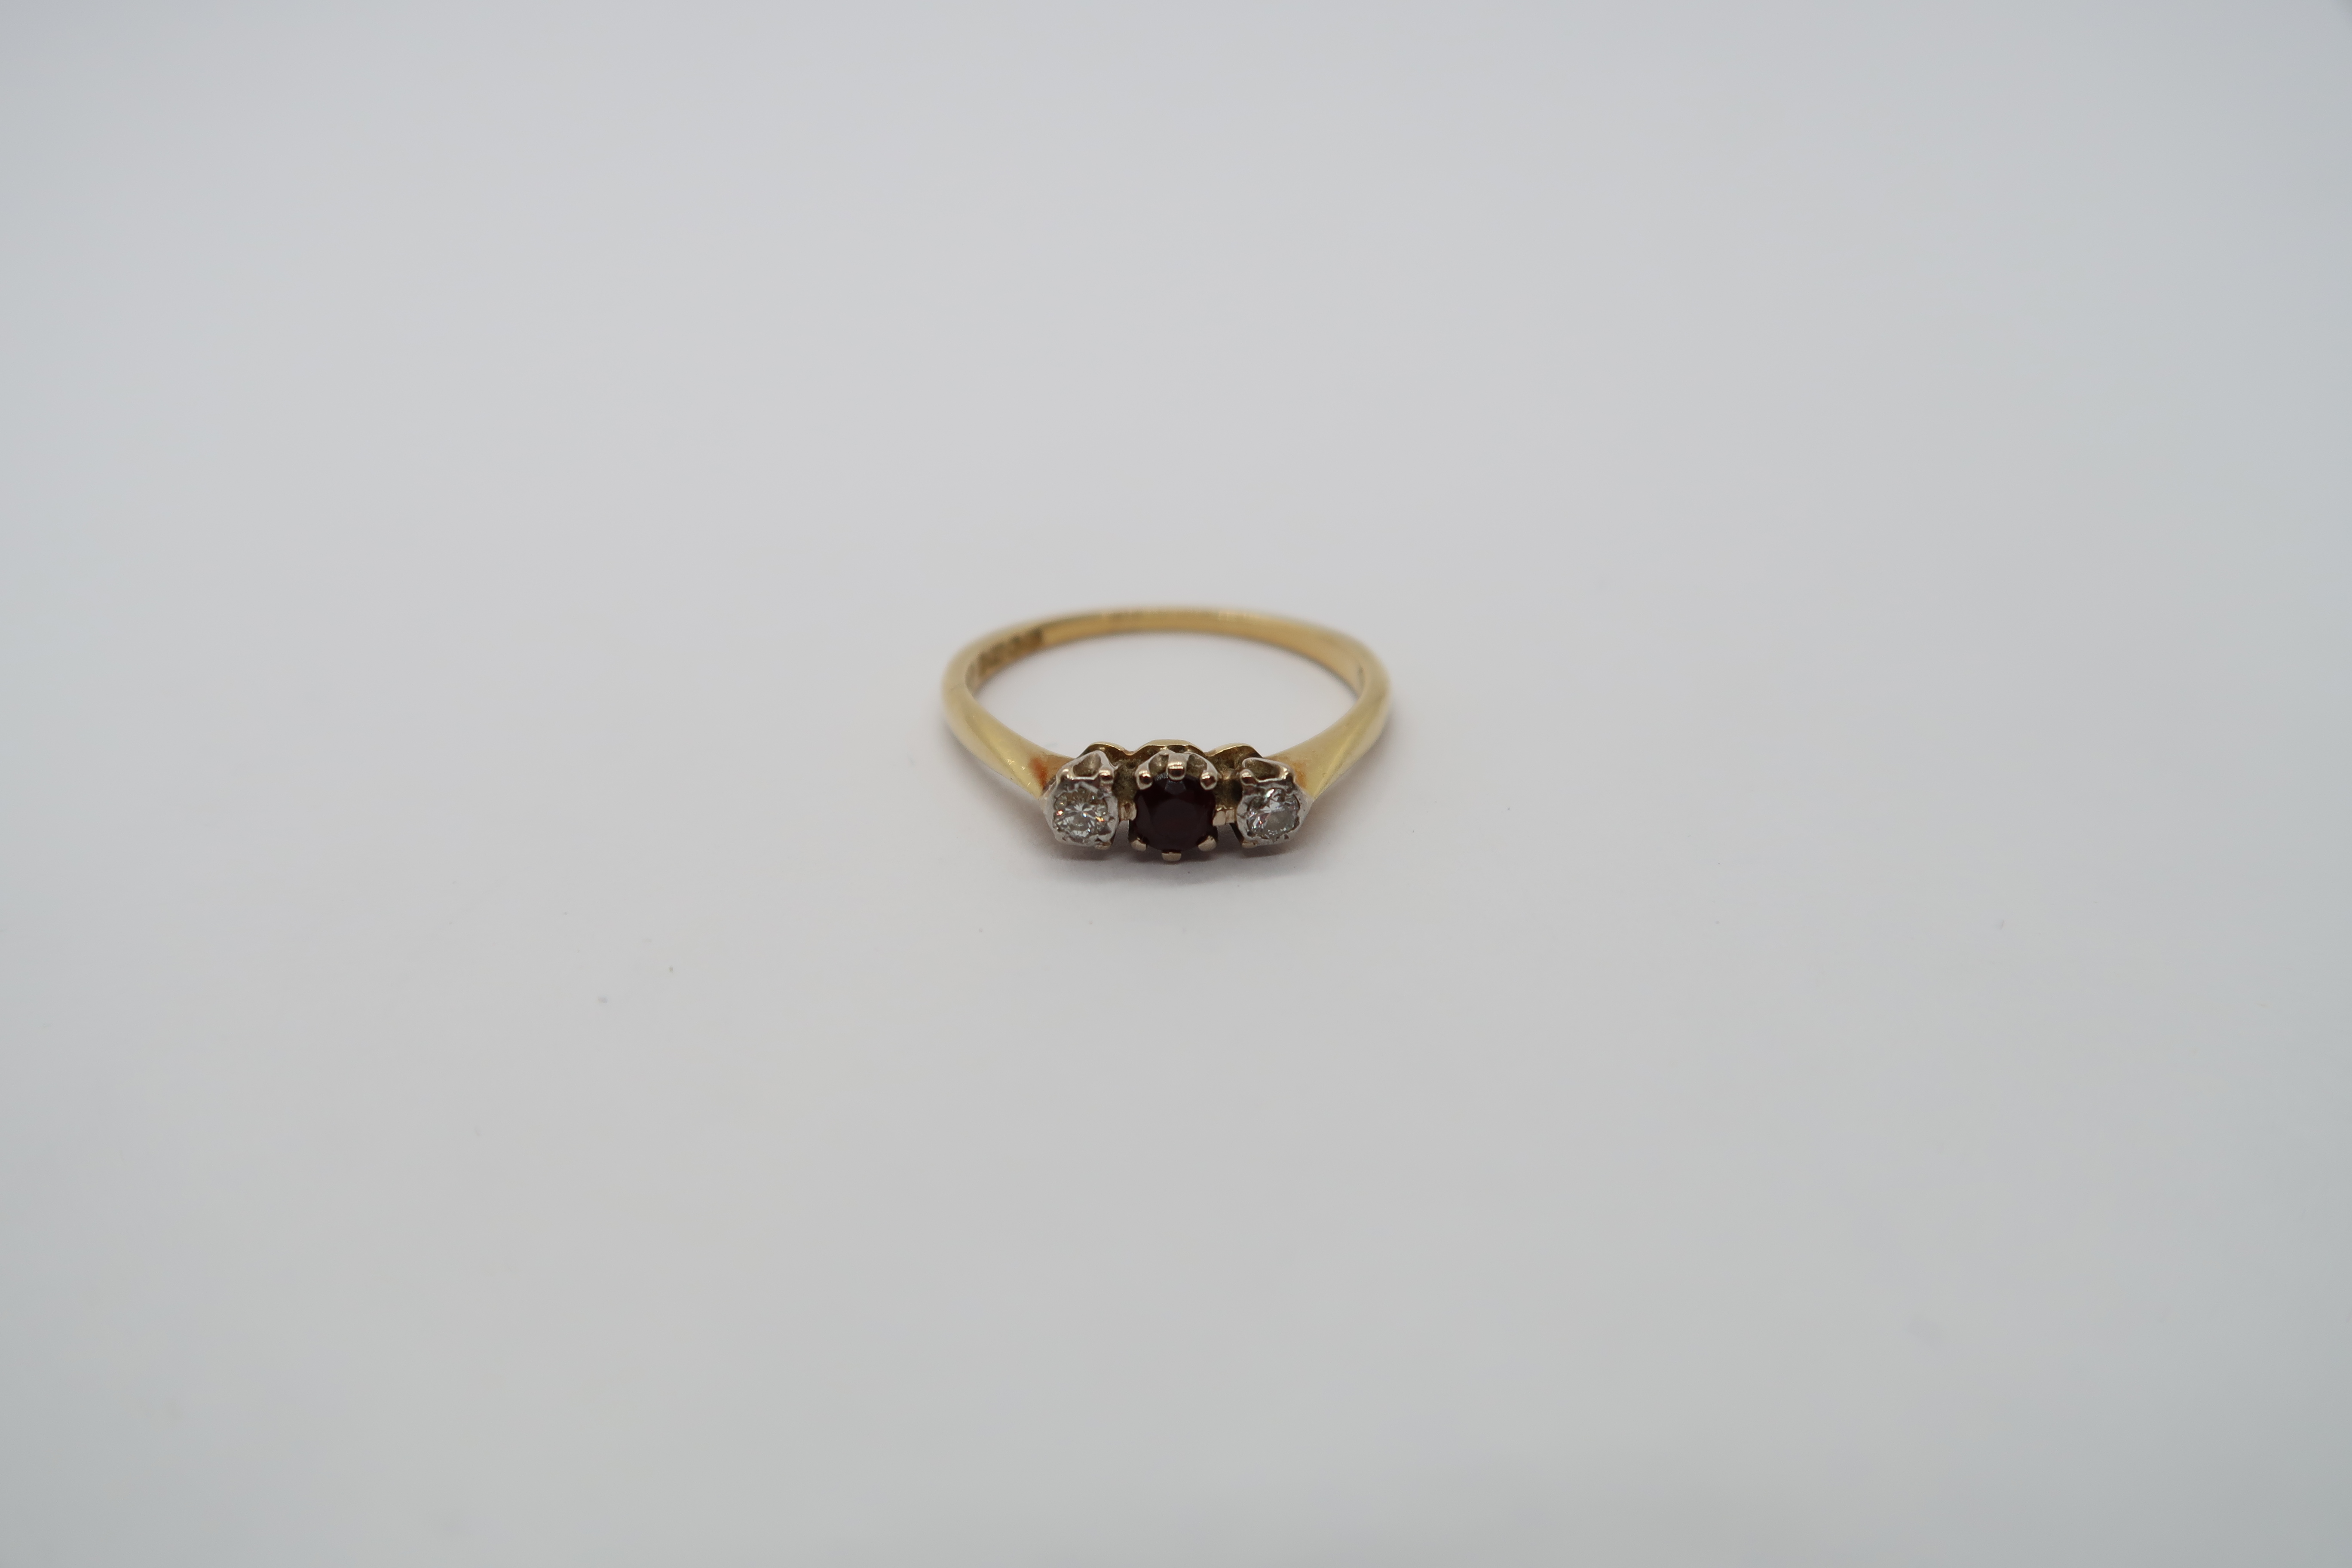 An 18ct hallmarked yellow gold three stone ring with diamonds and garnet, size L, approx 2 grams